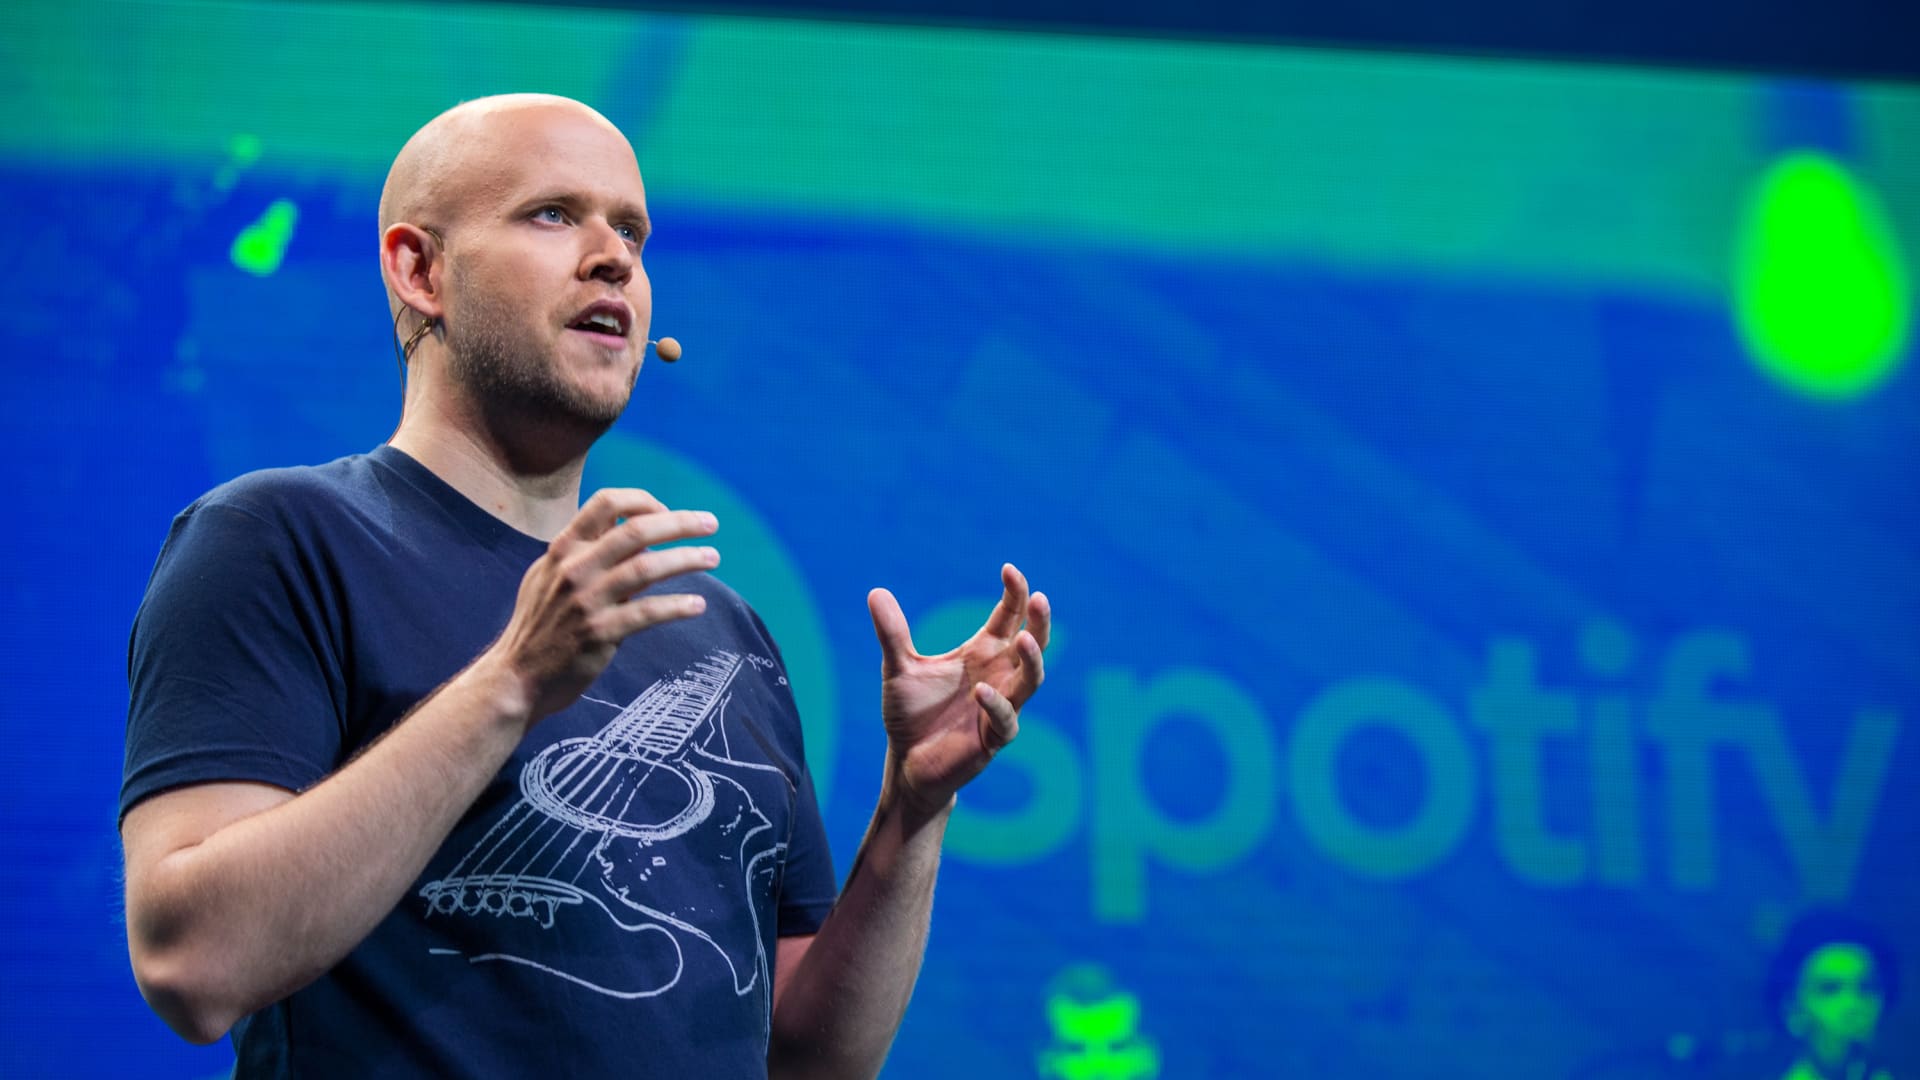 Spotify lays off 200 employees, or about 2% of its workforce